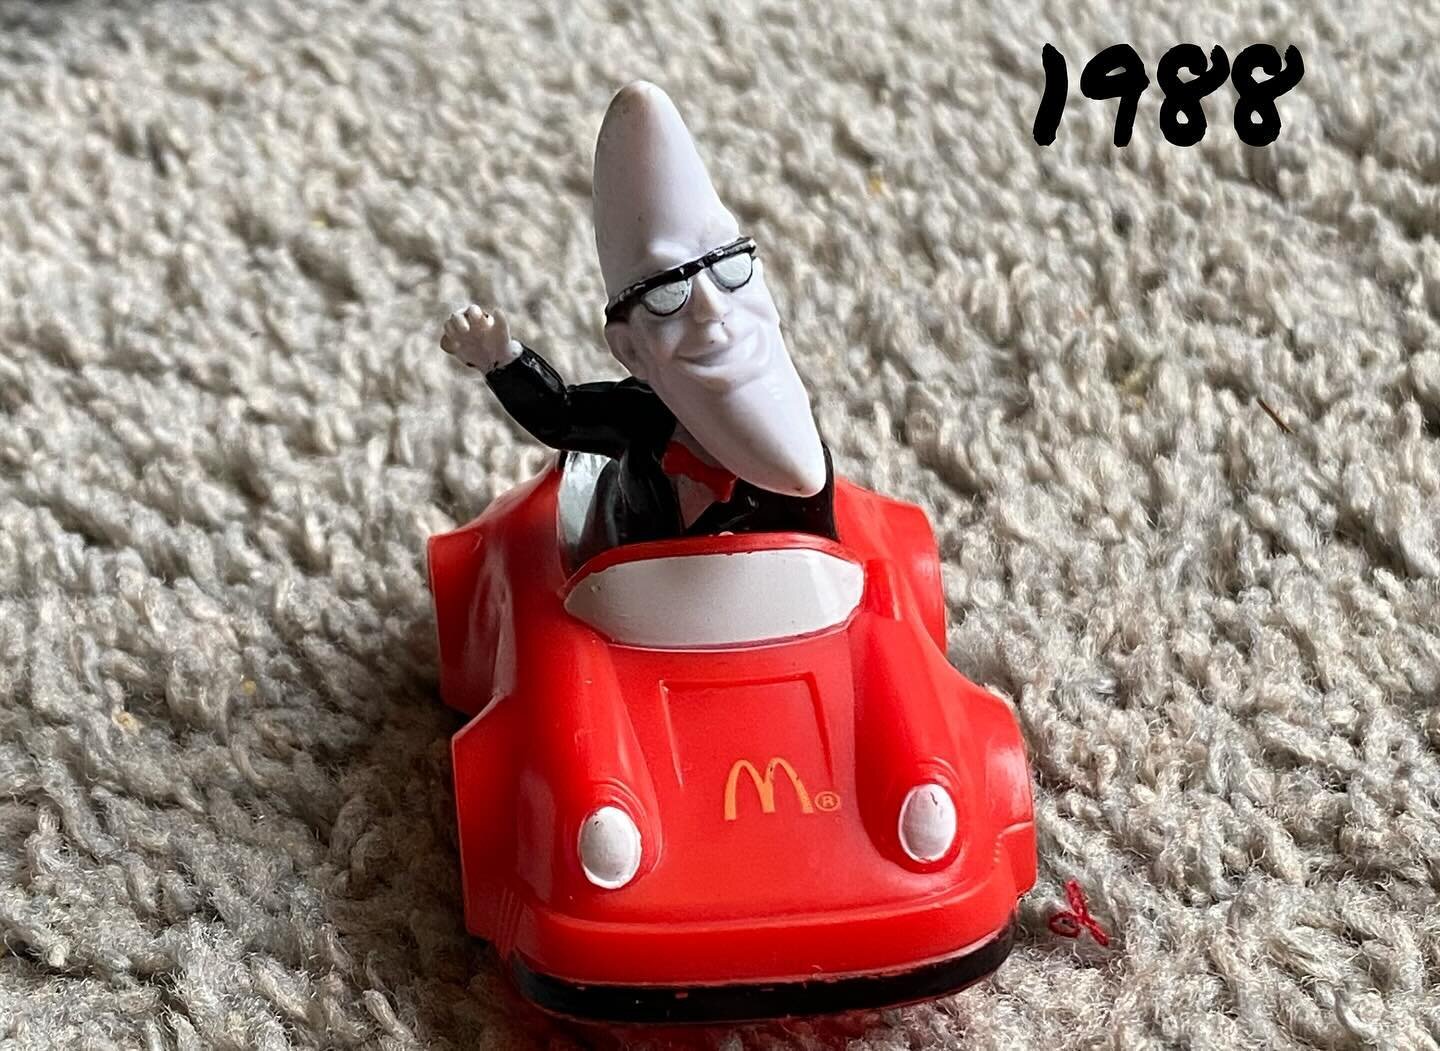 What's the first song that comes to your mind when you see this toy? I can't believe I found #moonman! #mcdonalds🍔🍟 #80skids #90skidsknow #drivethru #happymealtoys #happymealtoy